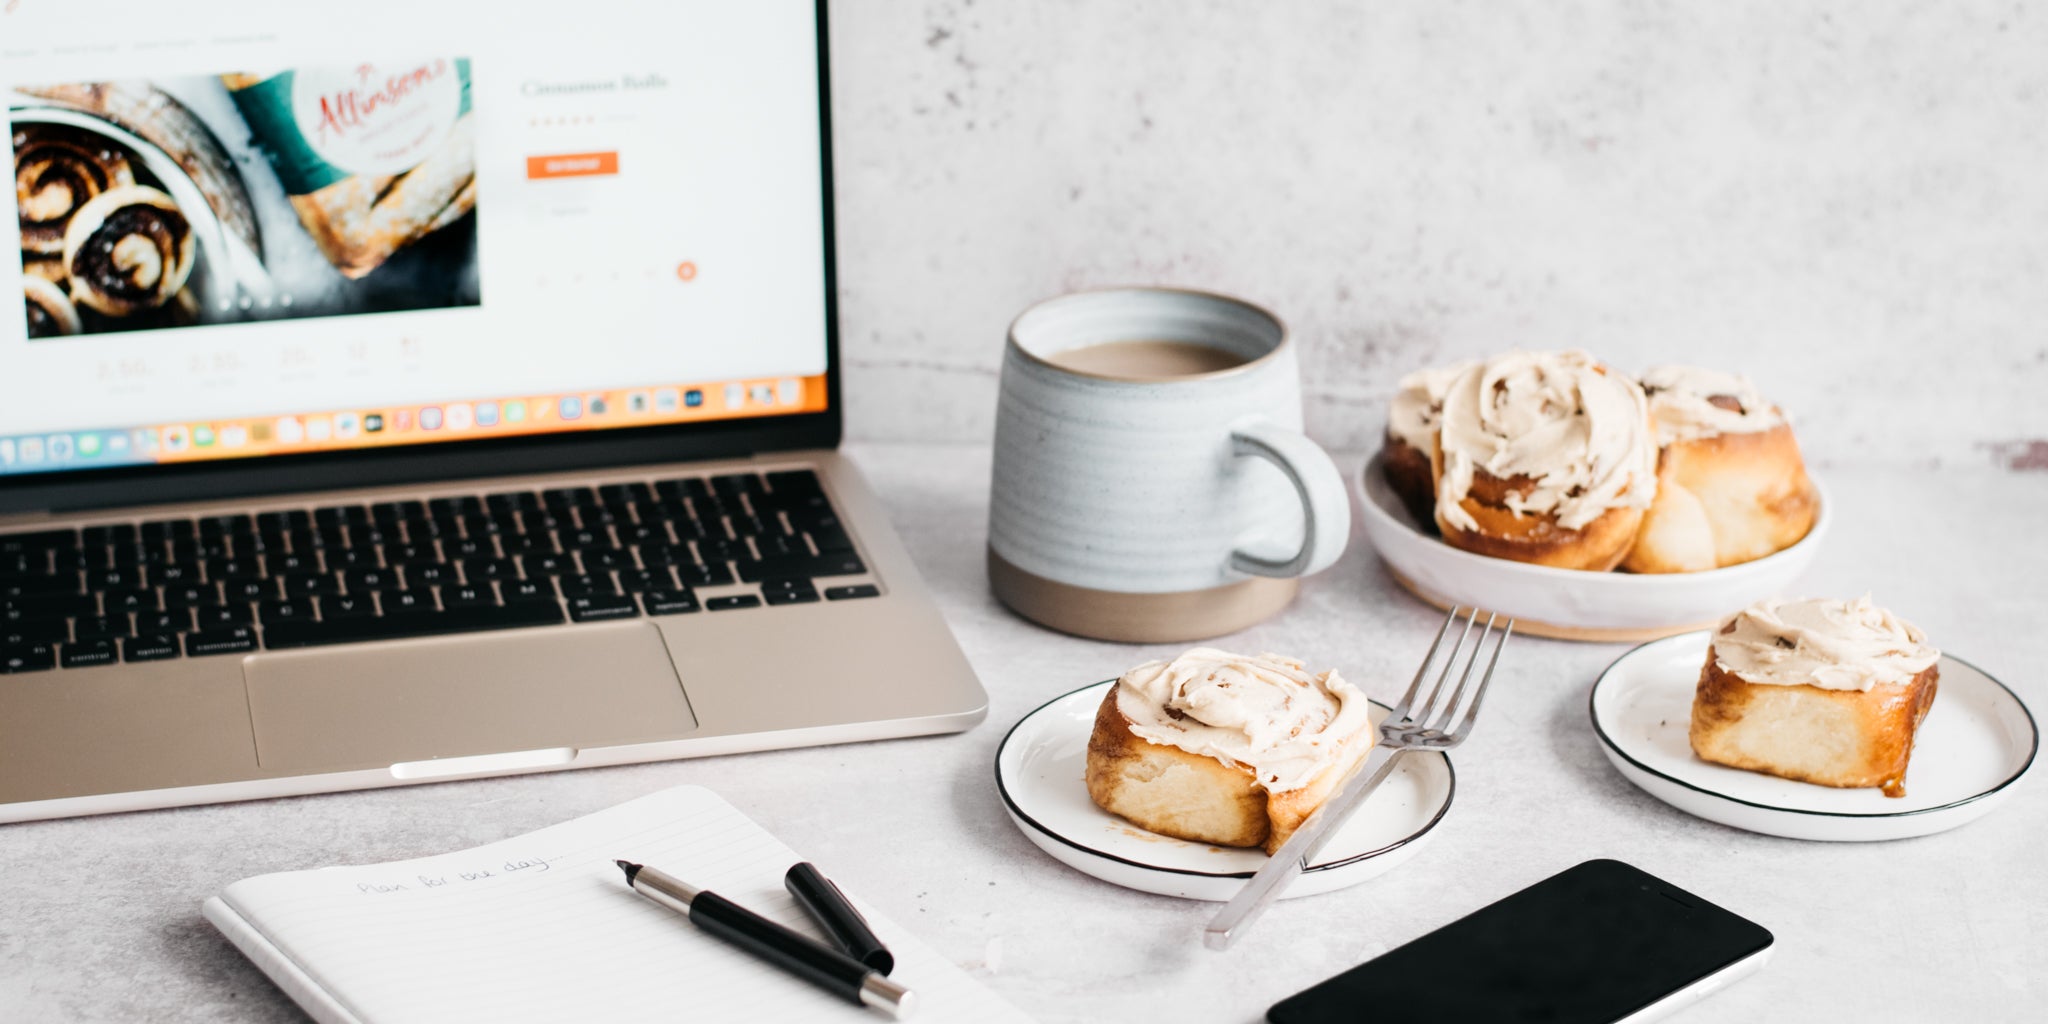 Cinnamon rolls on a plate next to a cup of coffee, laptop, phone and notepad